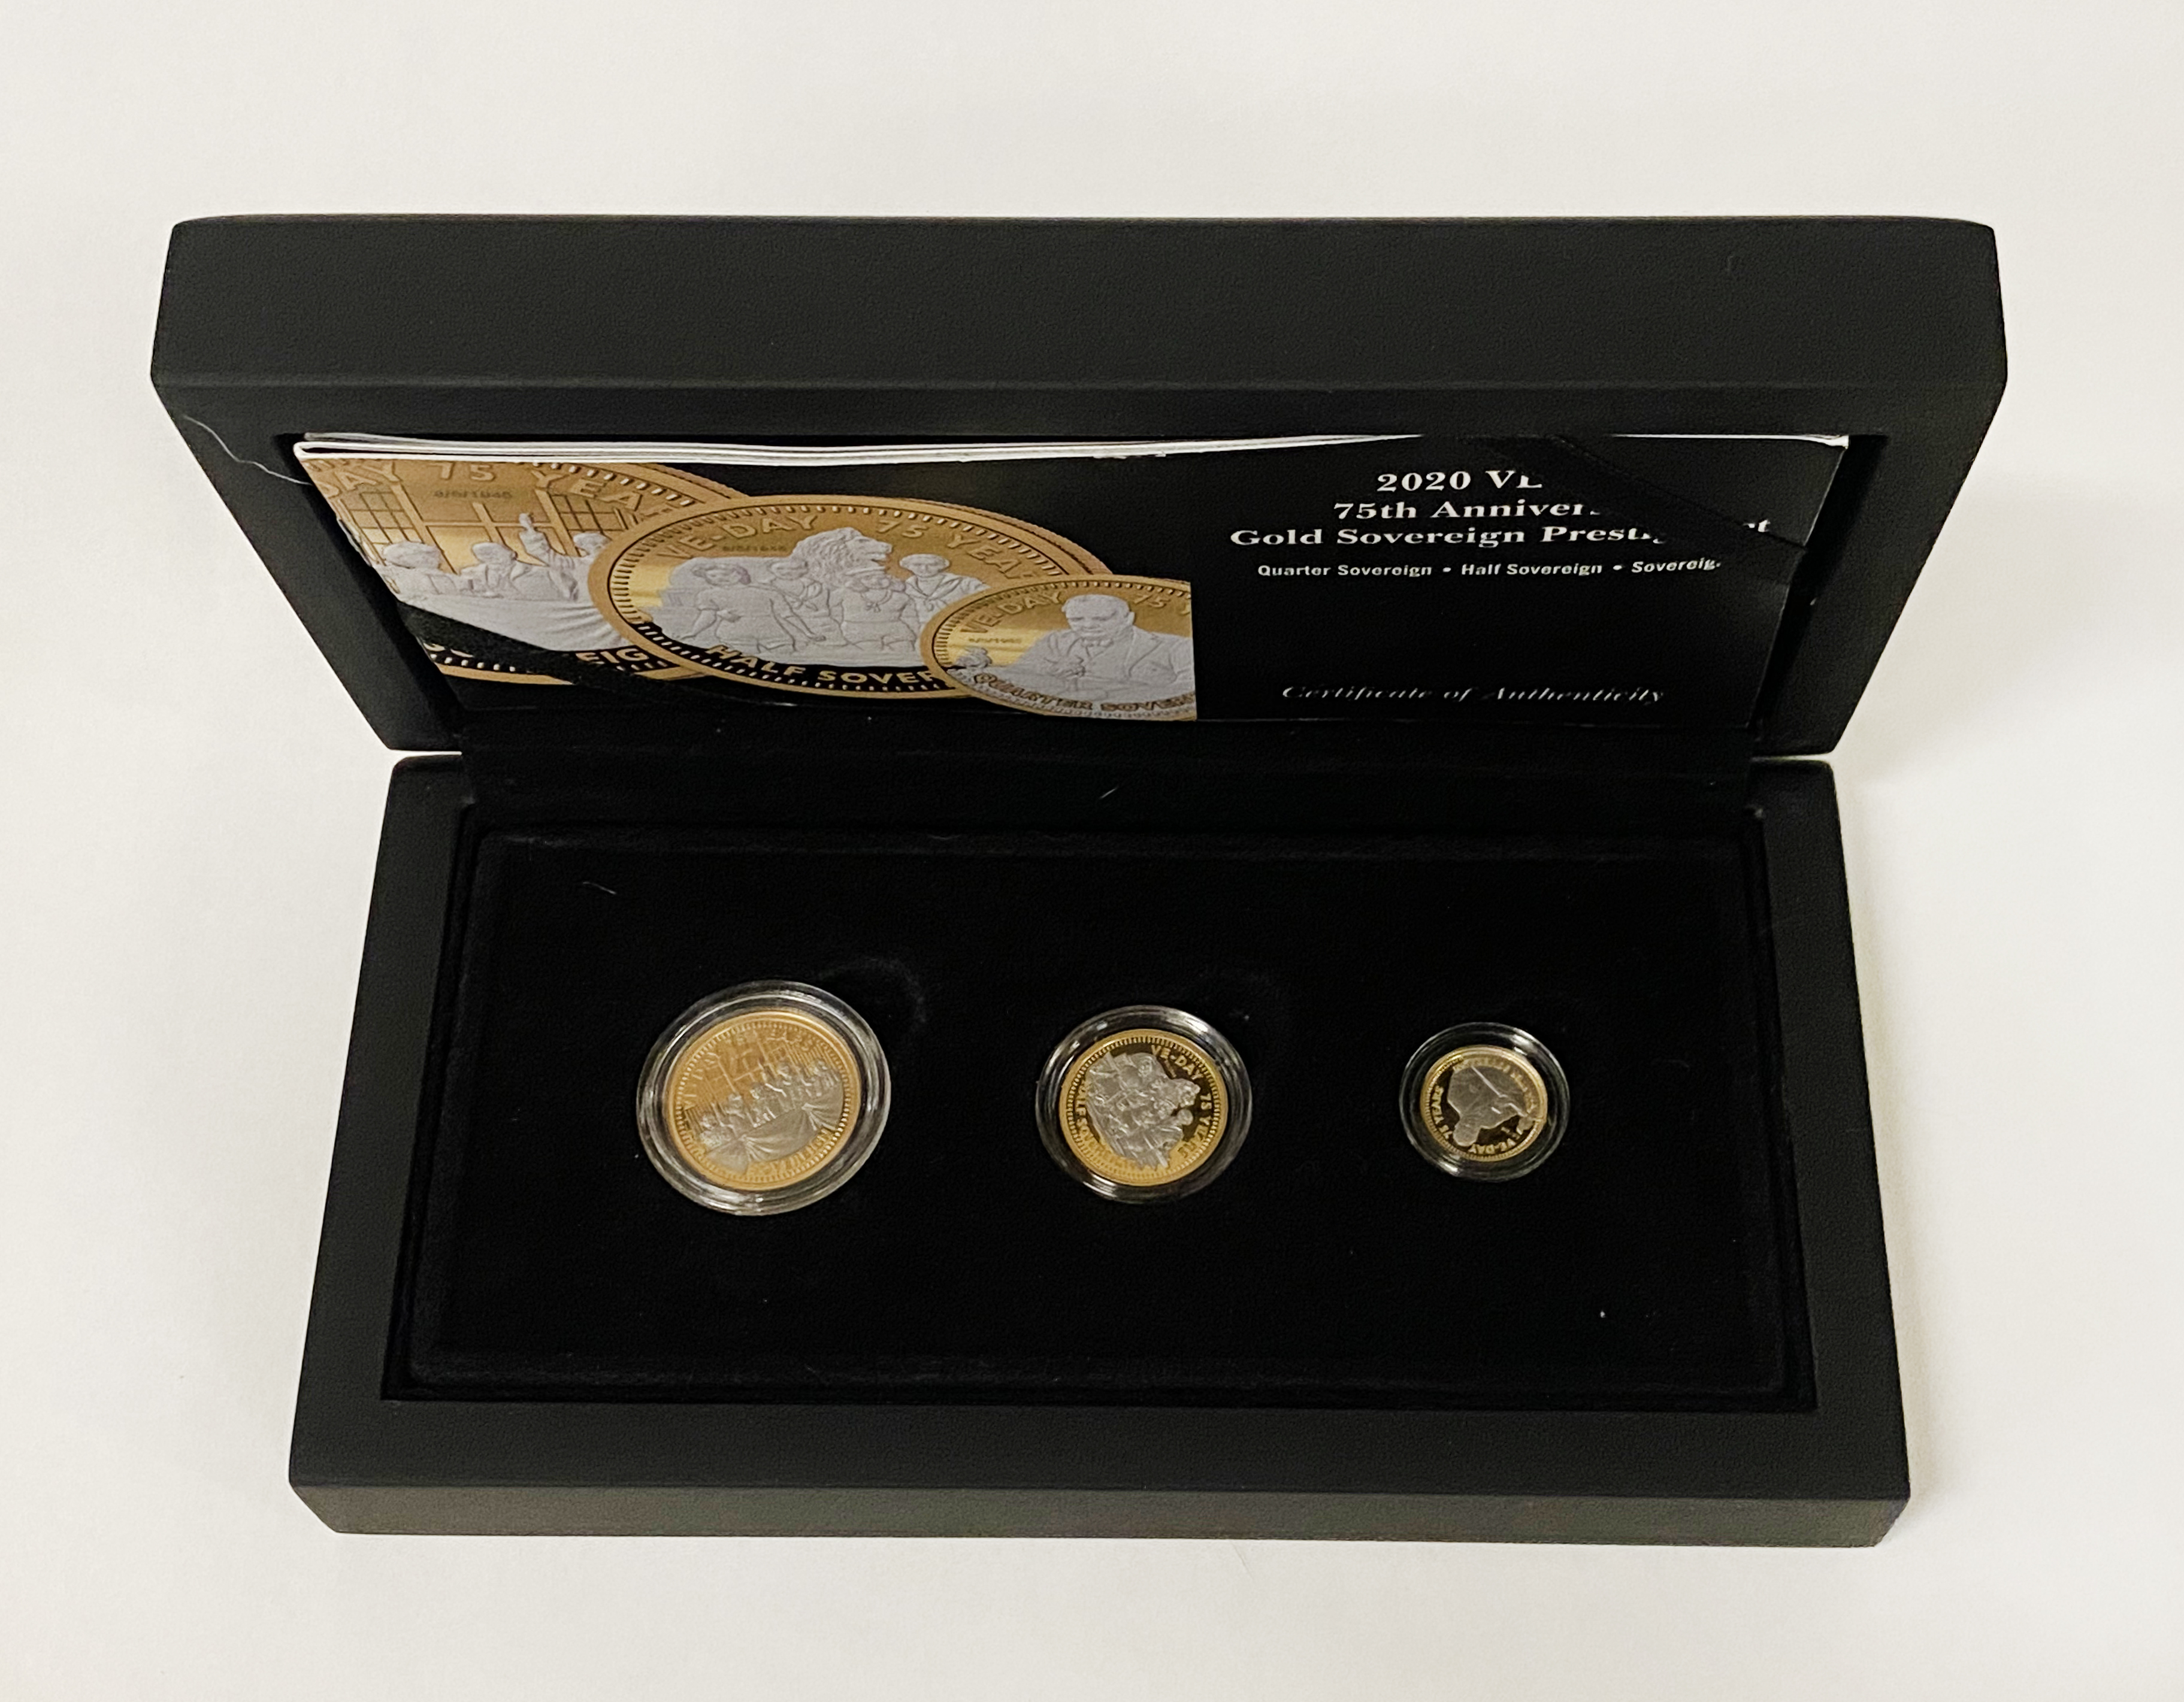 2020 VE DAY 75TH ANNIVERSARY GOLD SOVEREIGN PROOF SET - FULL/HALF & QUARTER SOVEREIGNS